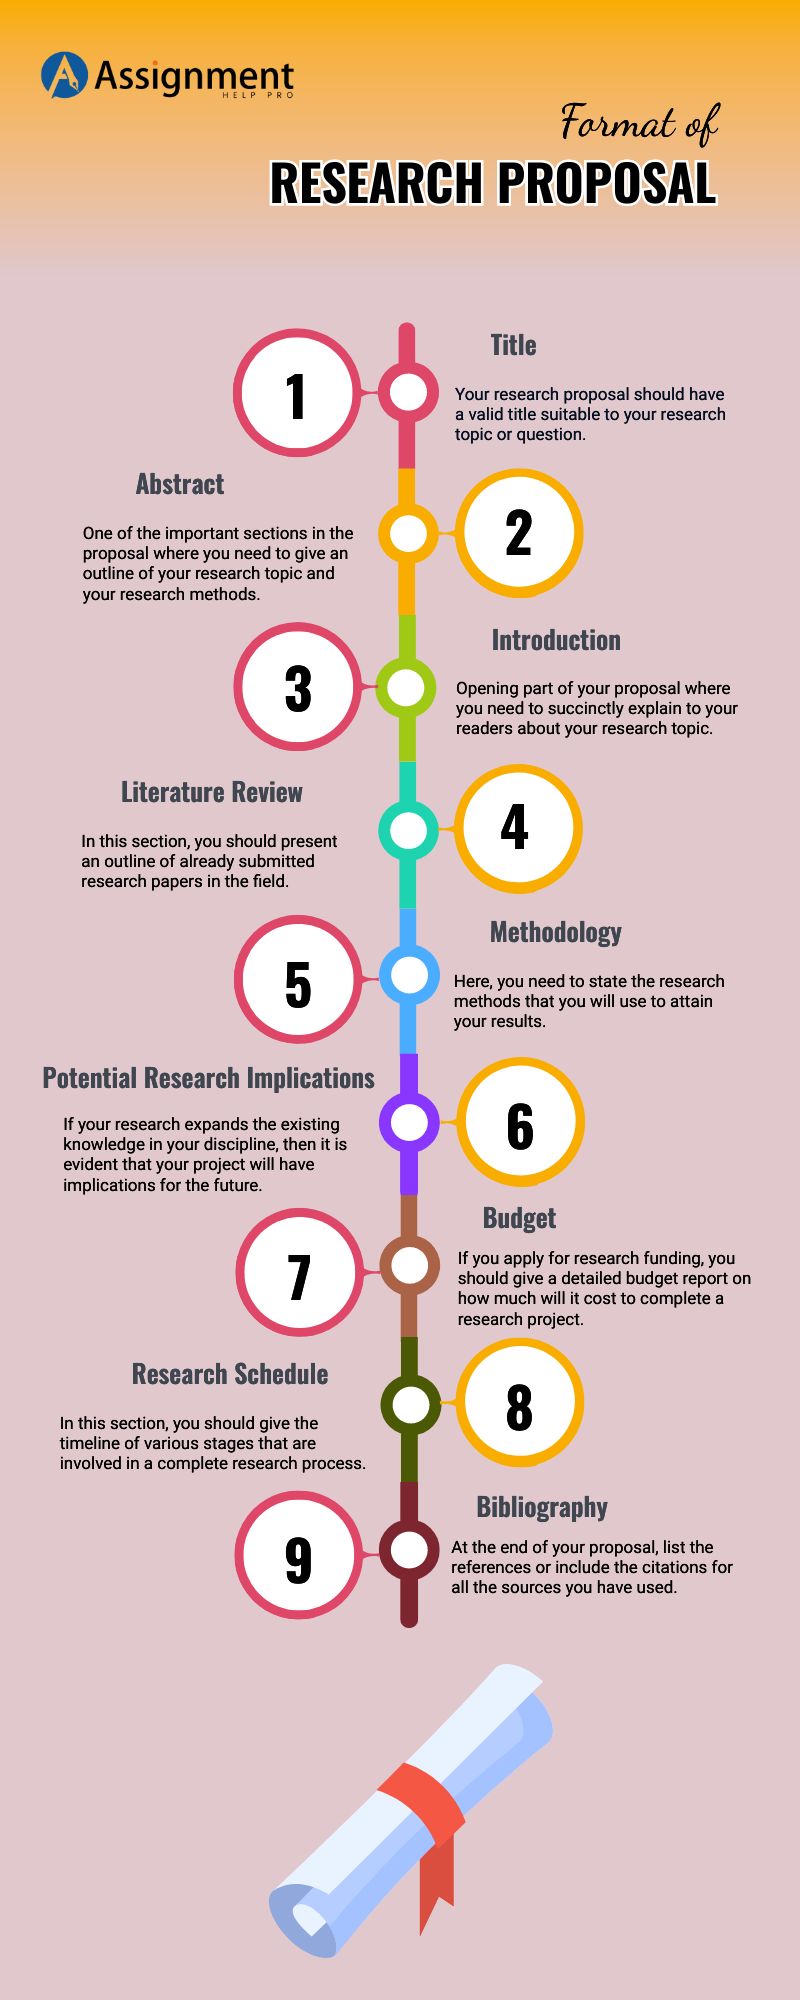 what are elements of research proposal